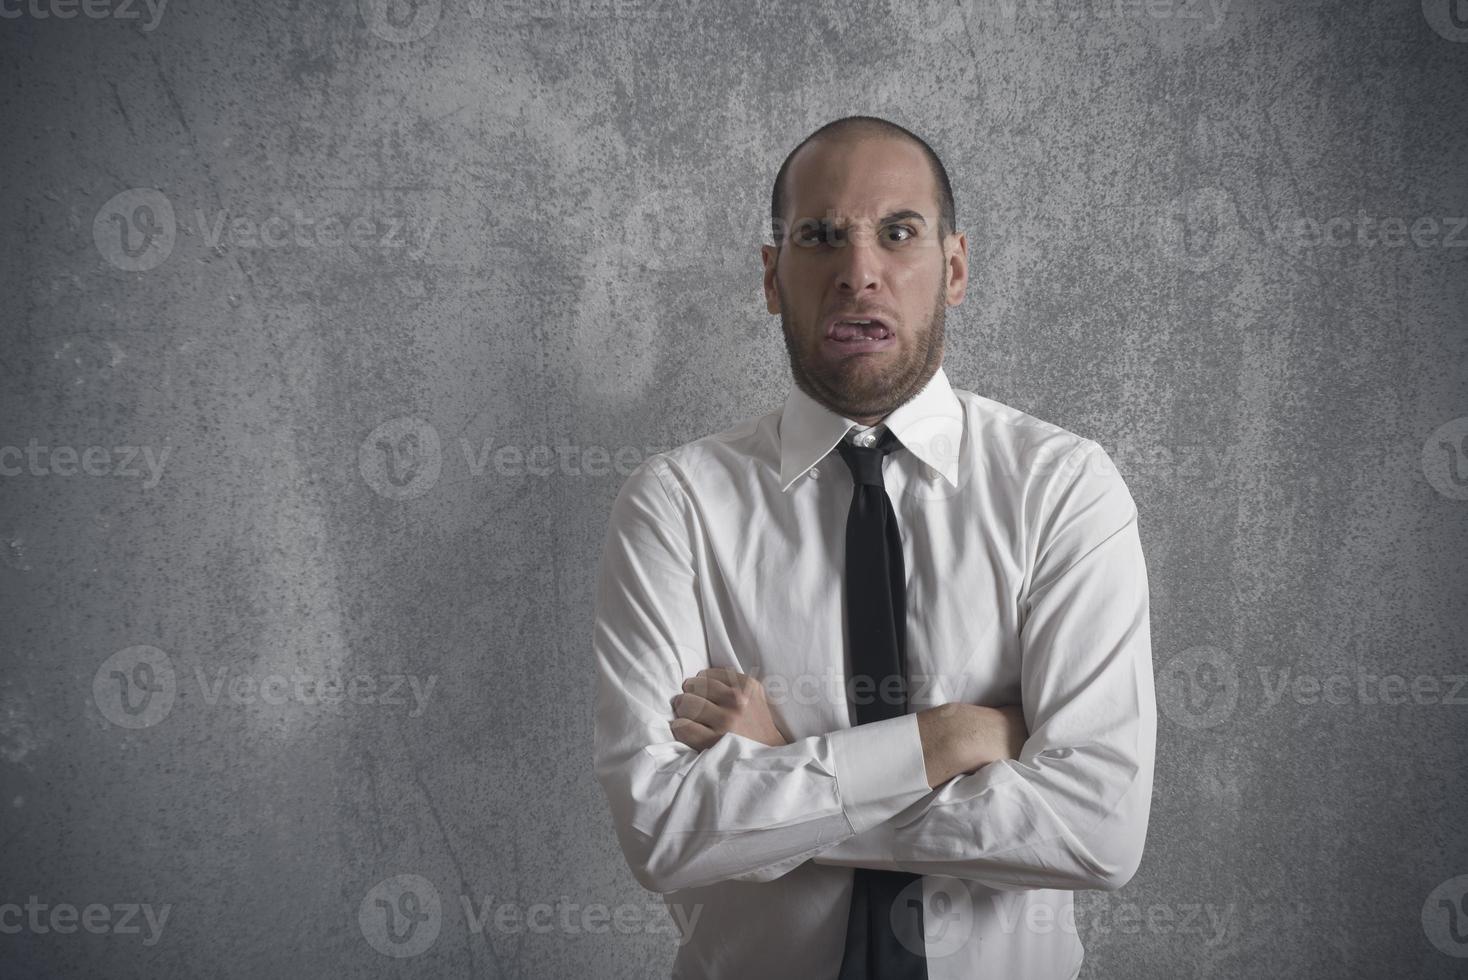 Disgusted businessman. Face expression photo